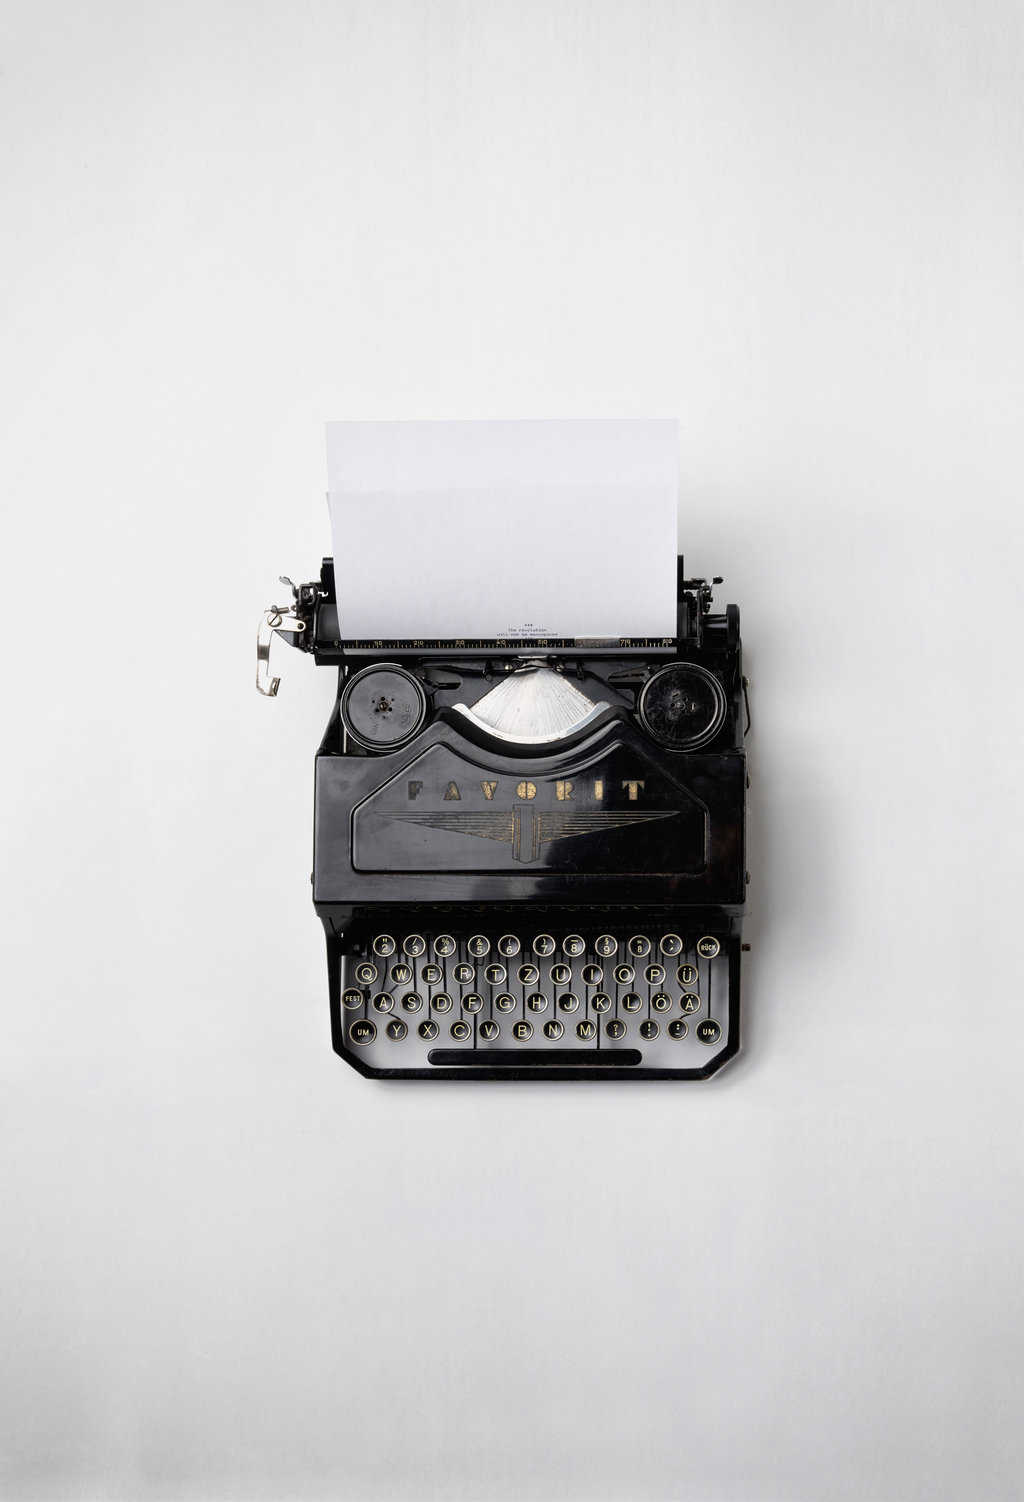 An old black typewriter against an all white background.